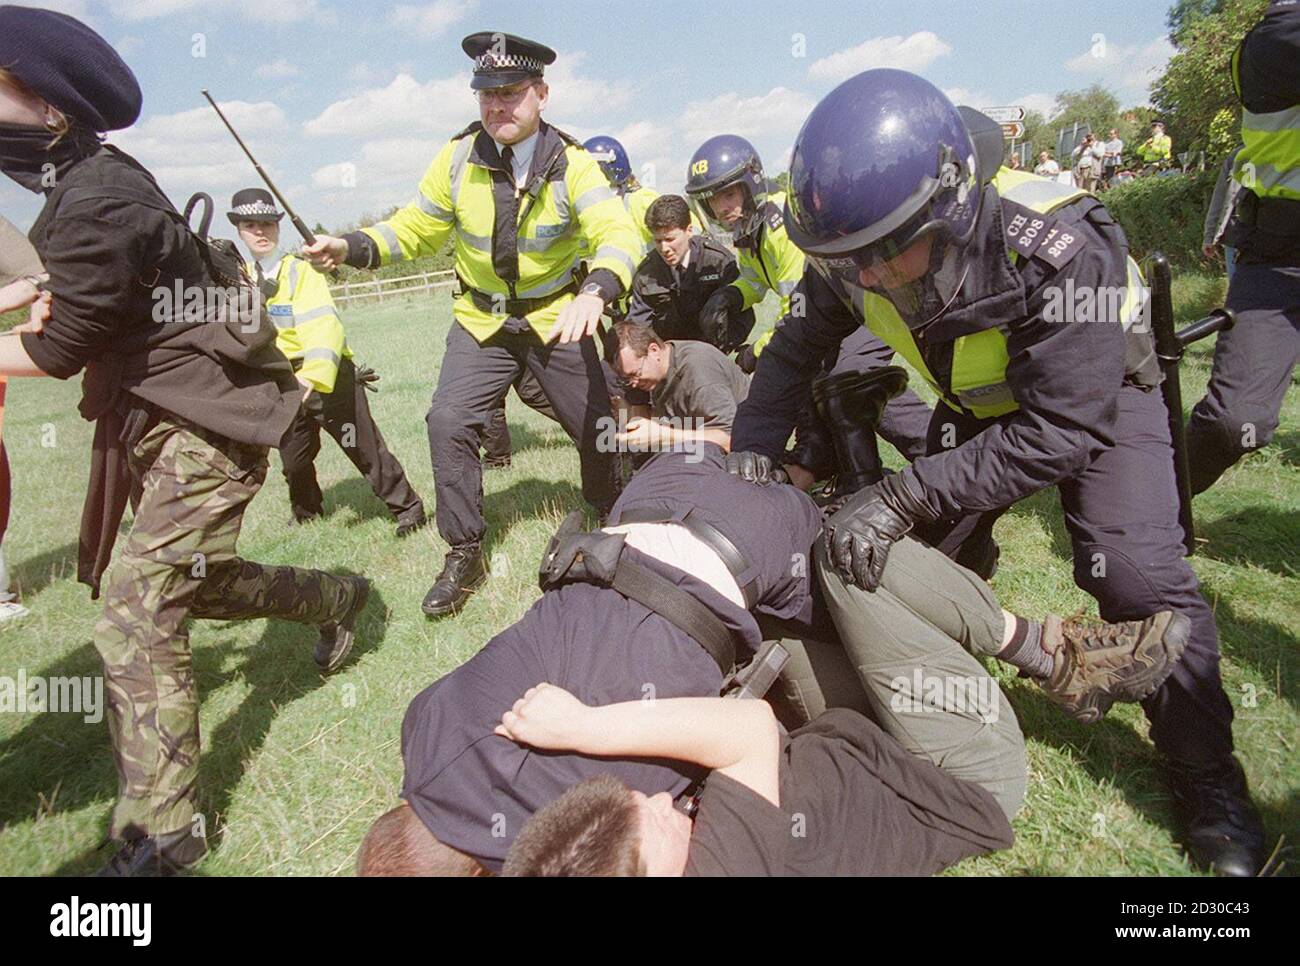 Police clash with demonstrators, as more than 200 animal rights protesters stage a rally outside Shamrock Farm in Small Dole, near Henfield, West Sussex, opposing the farm's importation of macaque monkeys into Britain to be used in medical testing. Stock Photo